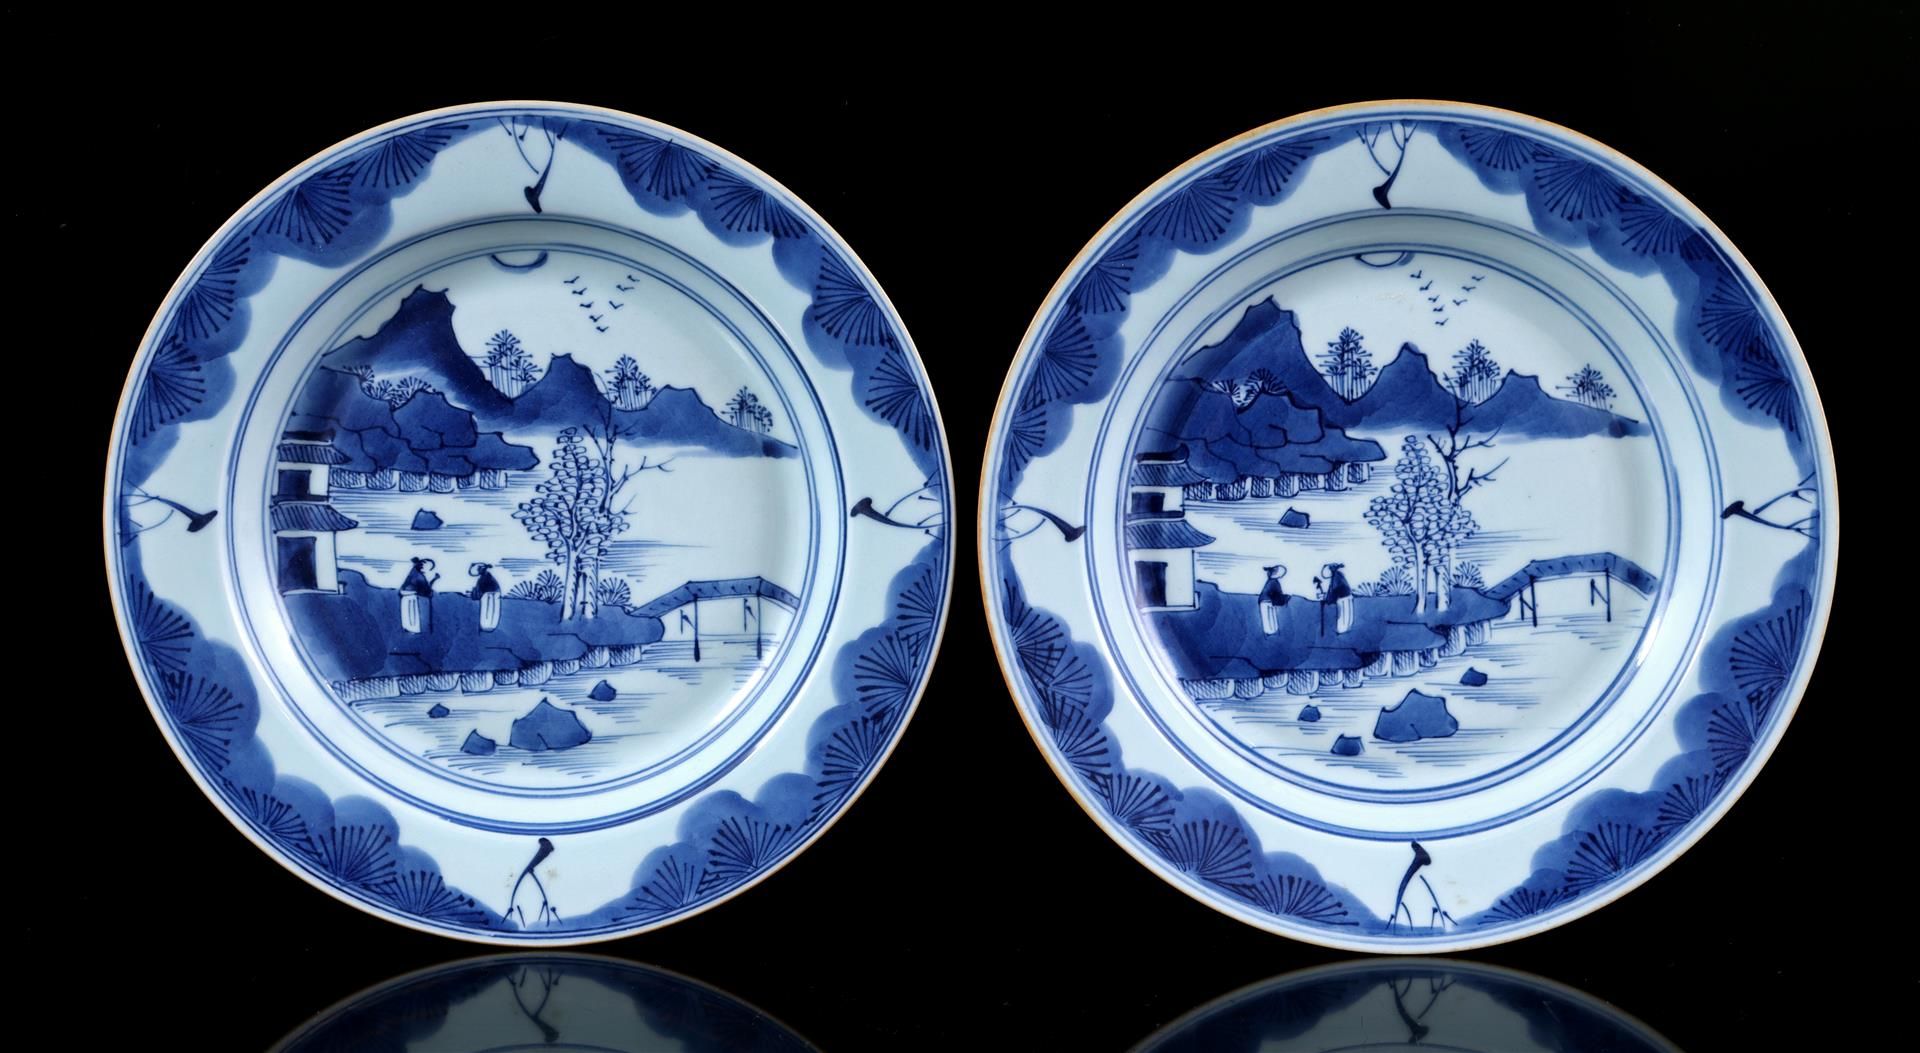 2 dishes with blue and white decor of 2 people